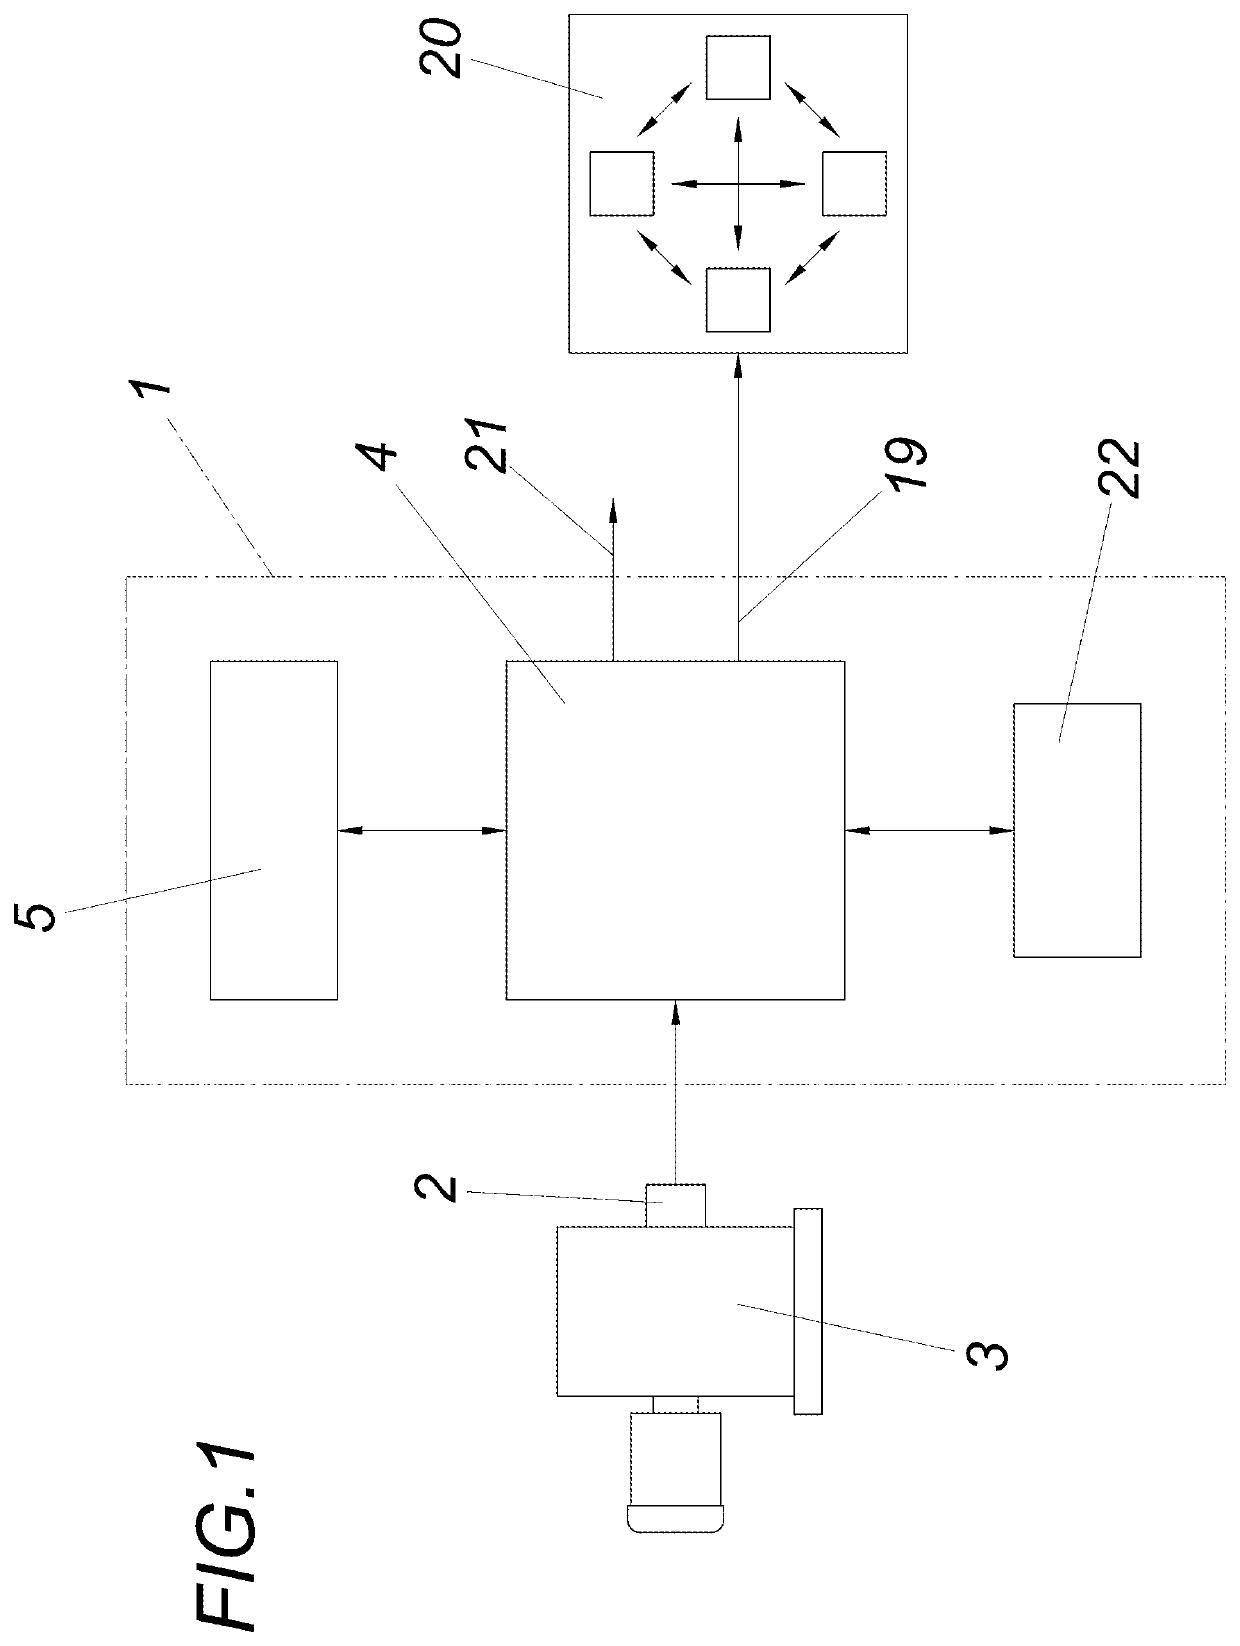 Apparatus and method for checking the integrity of sensor-data streams